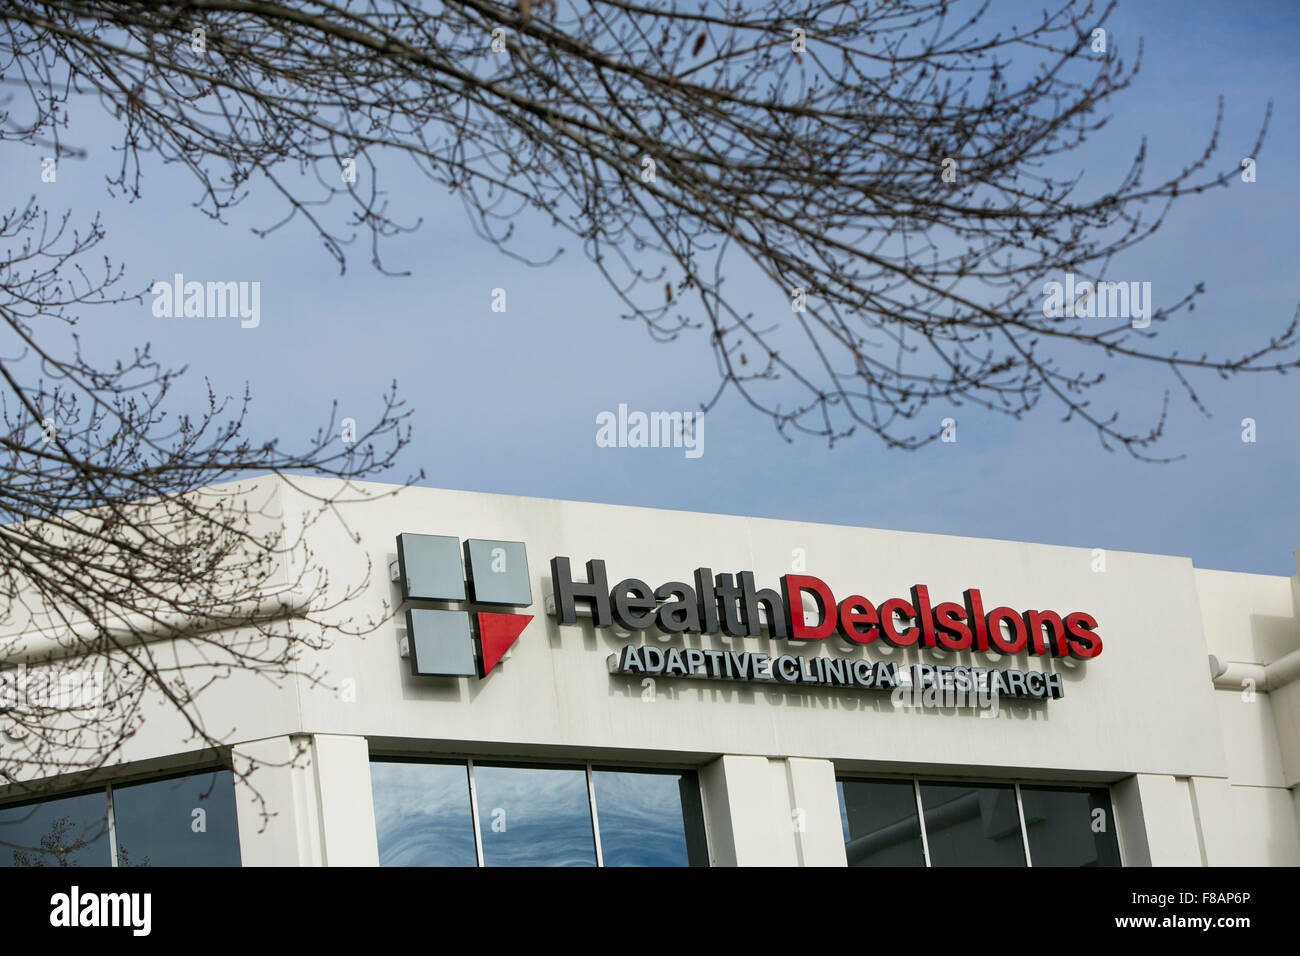 A logo sign outside of a facility occupied by Health Decisions Inc., in Durham, North Carolina on November 29, 2015. Stock Photo